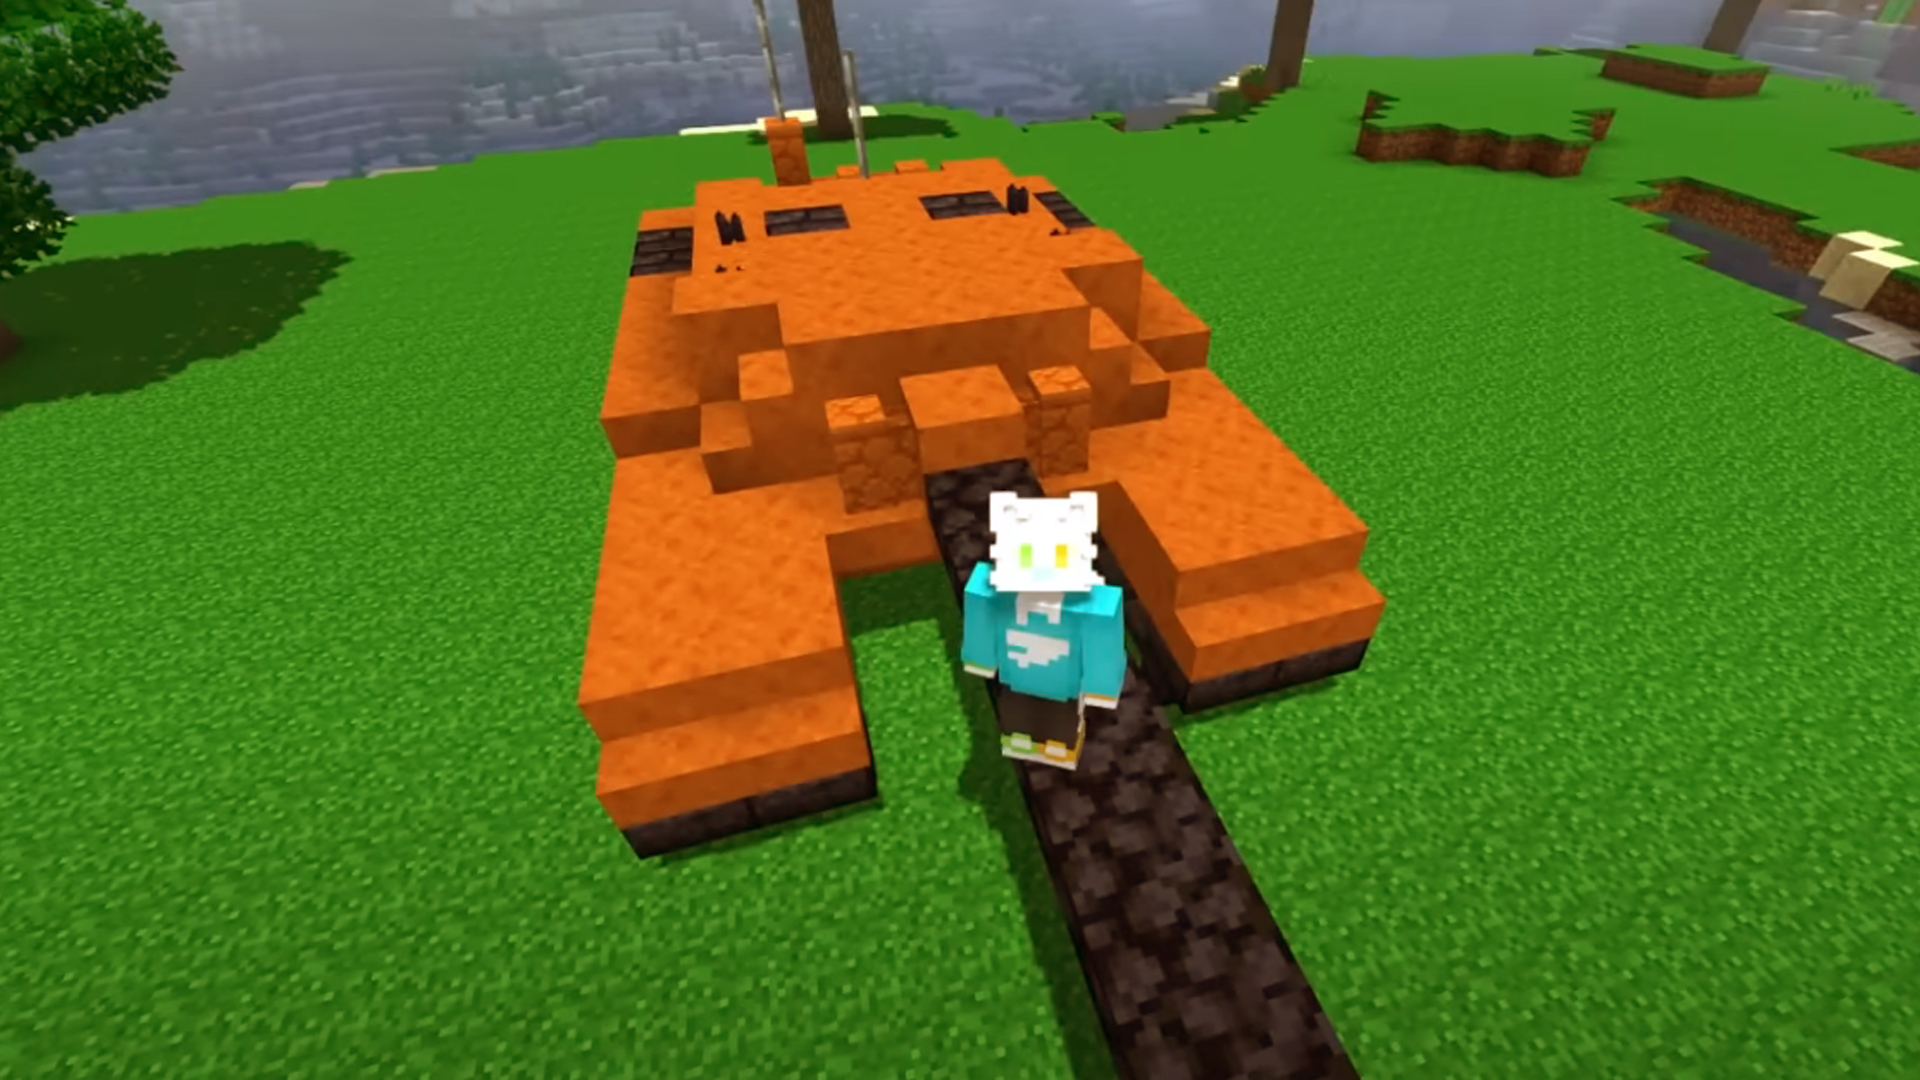 This Minecraft YouTuber built a working tank without mods